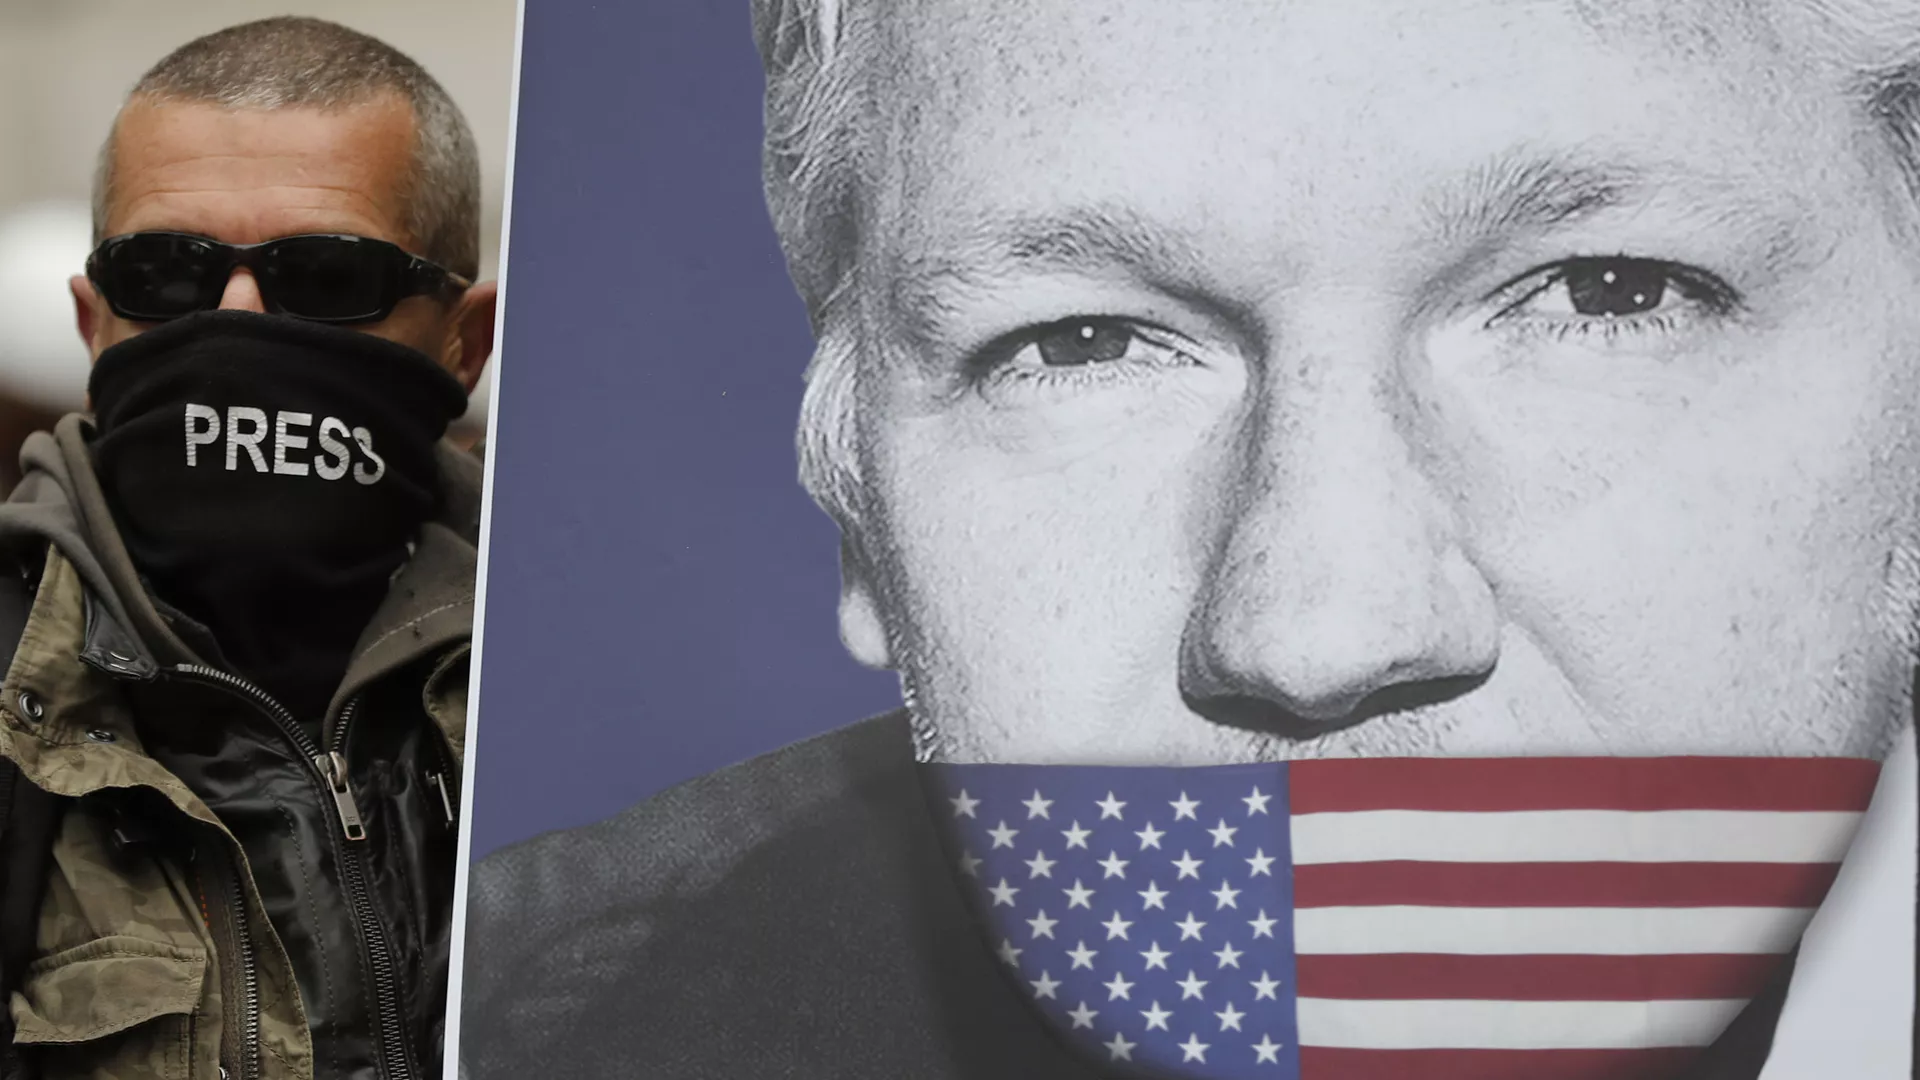 A photo of Julian Assange with his mouth covered by the US flag. Photo: AP Photo/Frank Augstein.